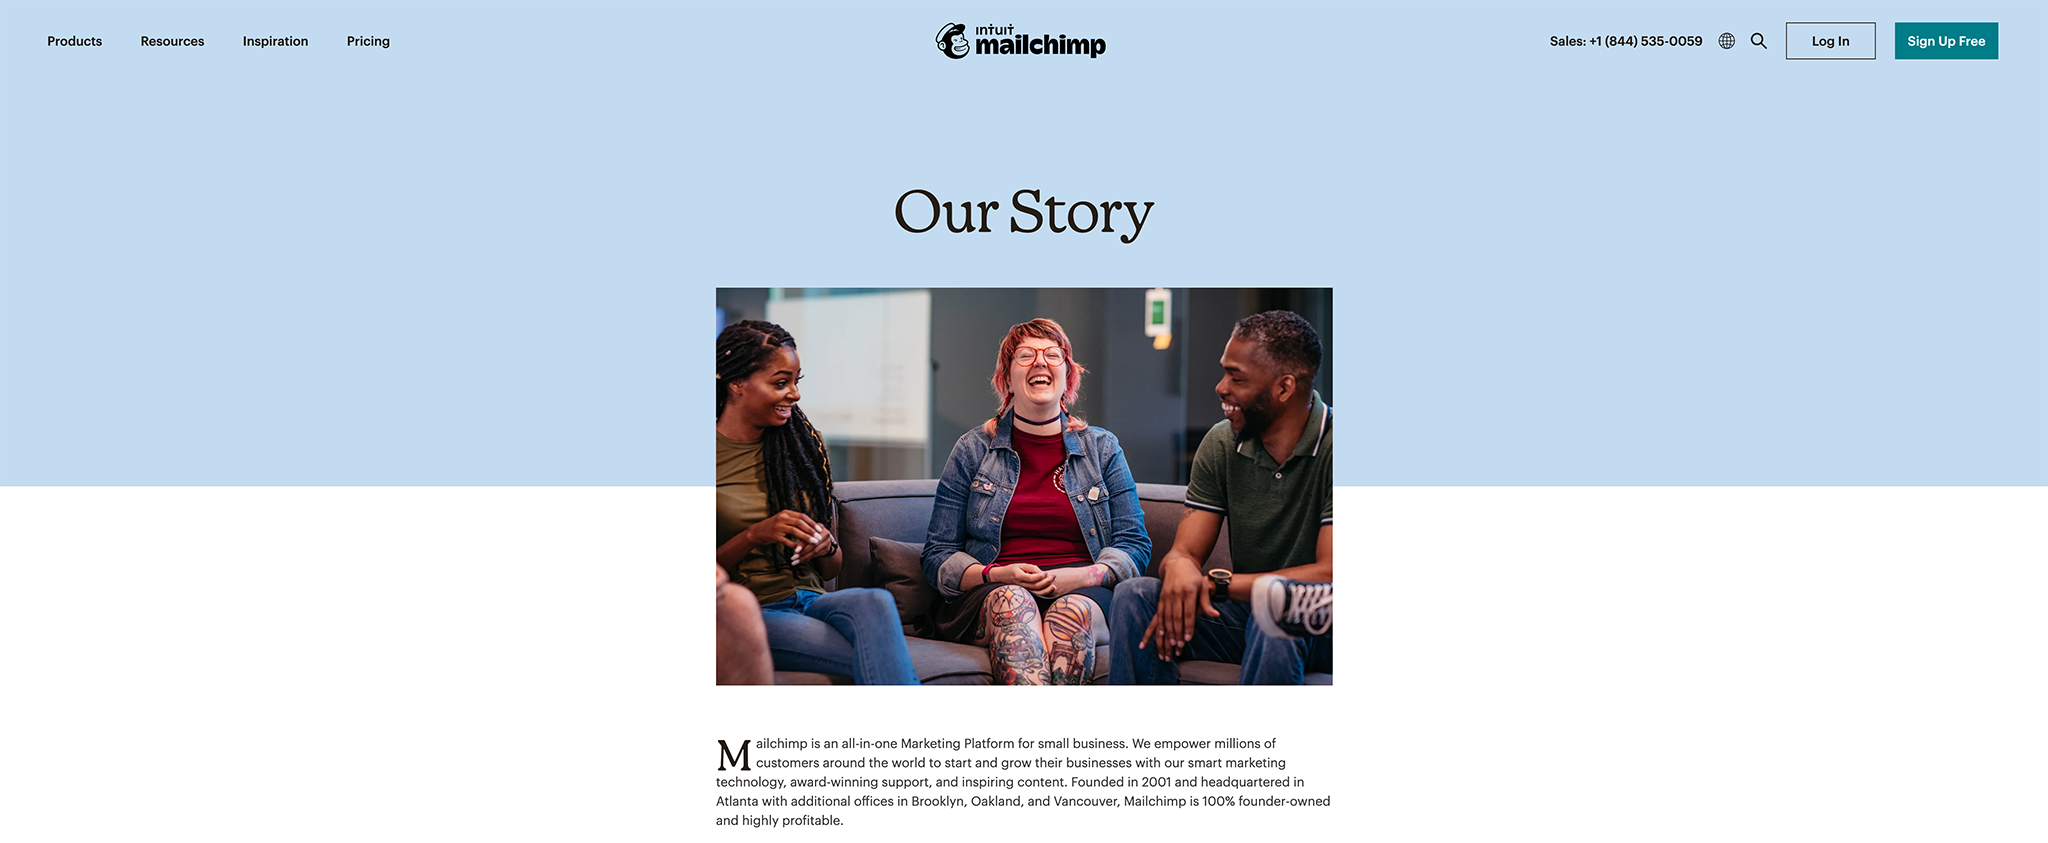 The Mailchimp about us page